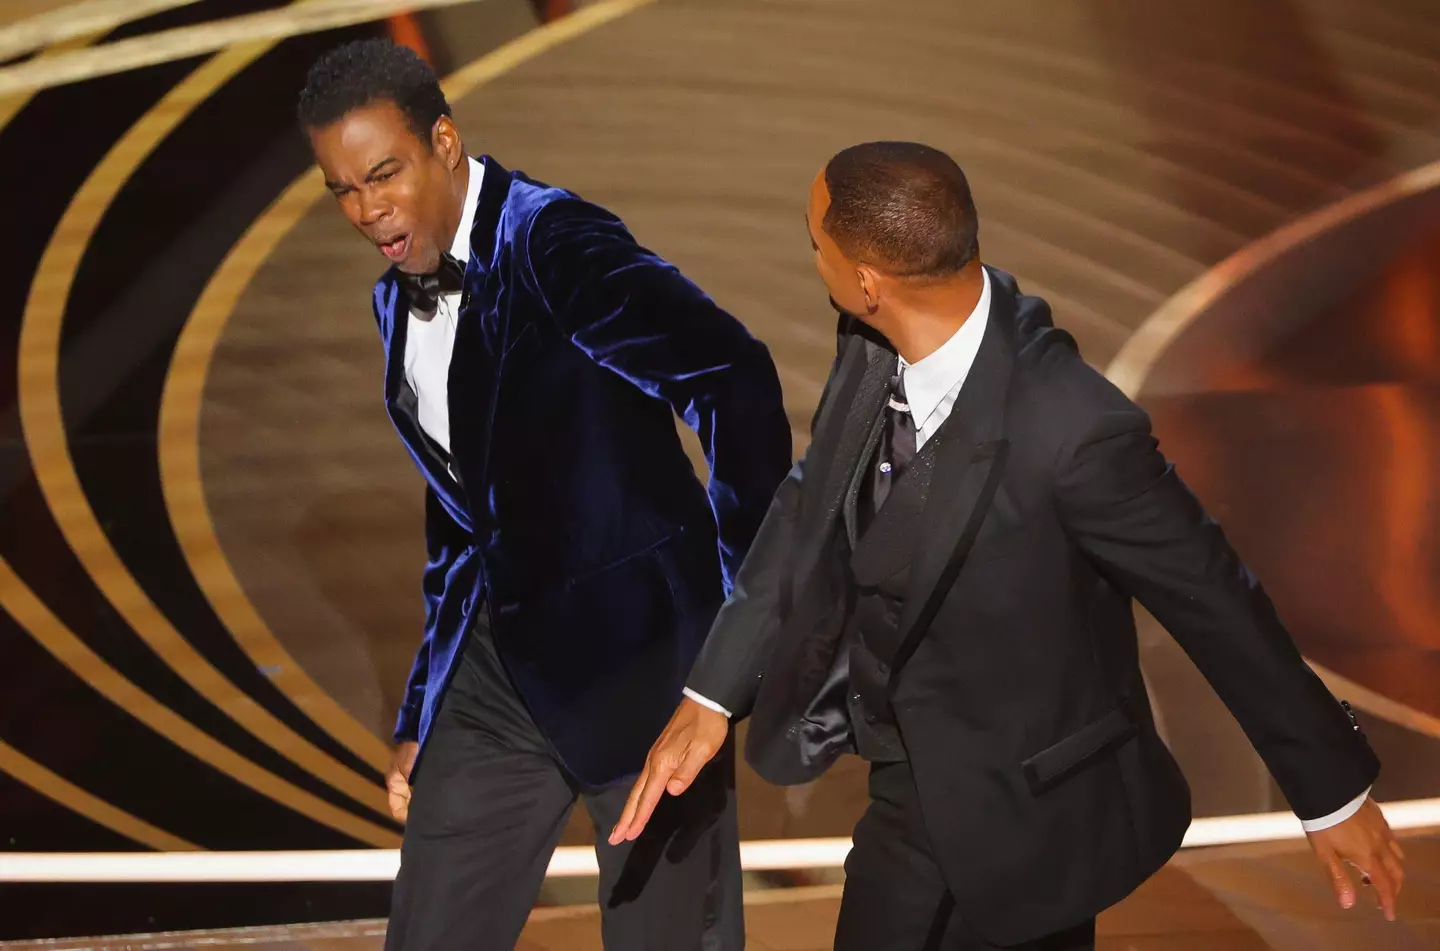 Chris Rock addressed Will Smith's infamous slap during his Netflix special Selective Outrage.